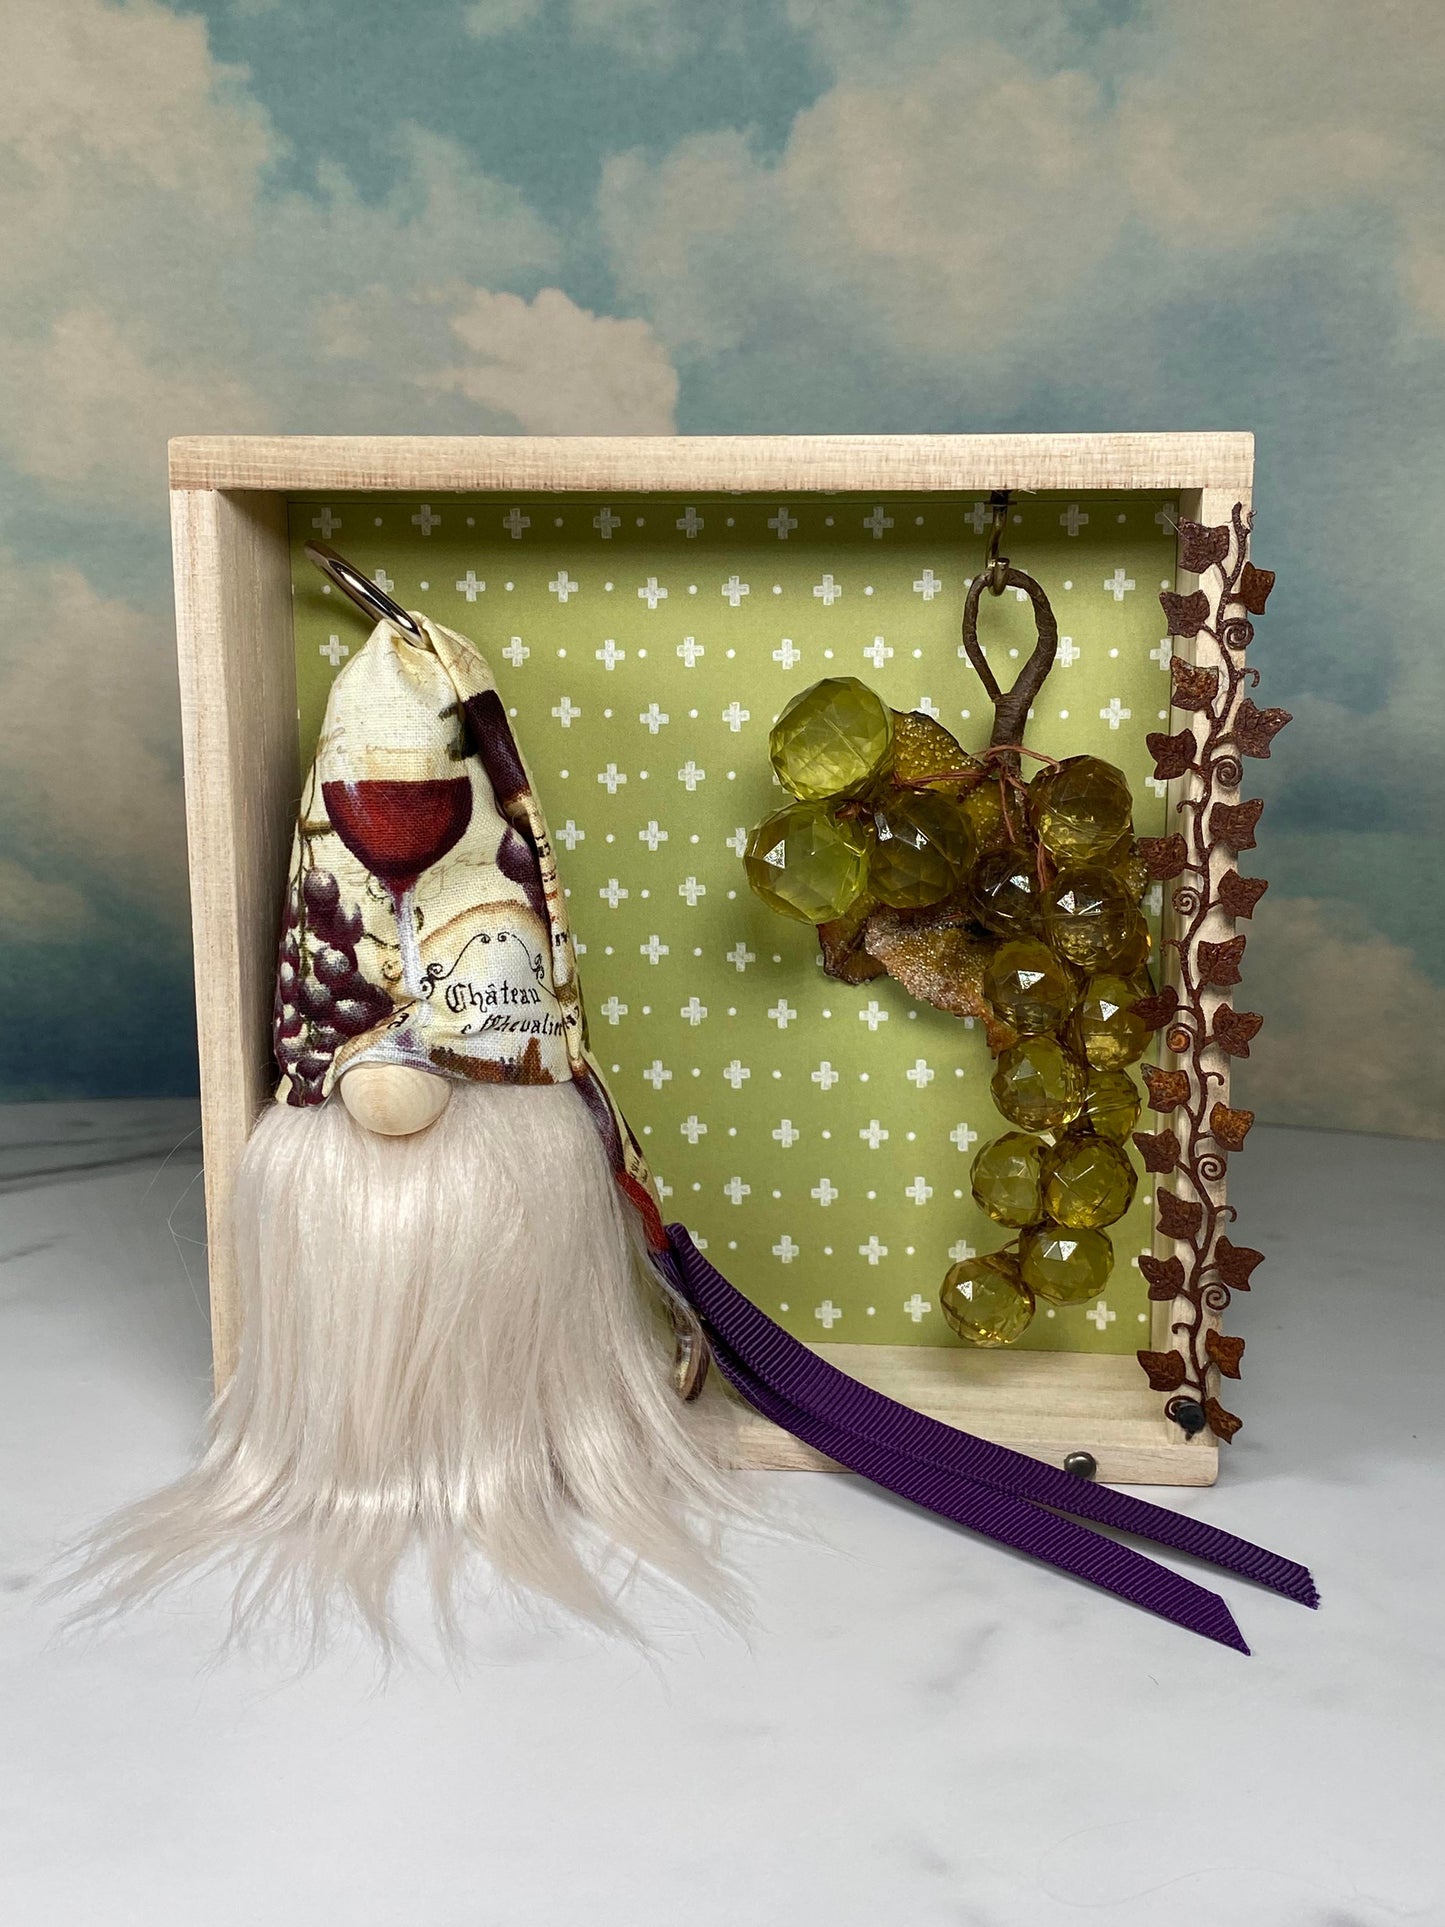 Gift Set - Wine Lovers Gift set with Gulfport Gnome™ - 4" Plush Gnome - Wine Grapes Ornament